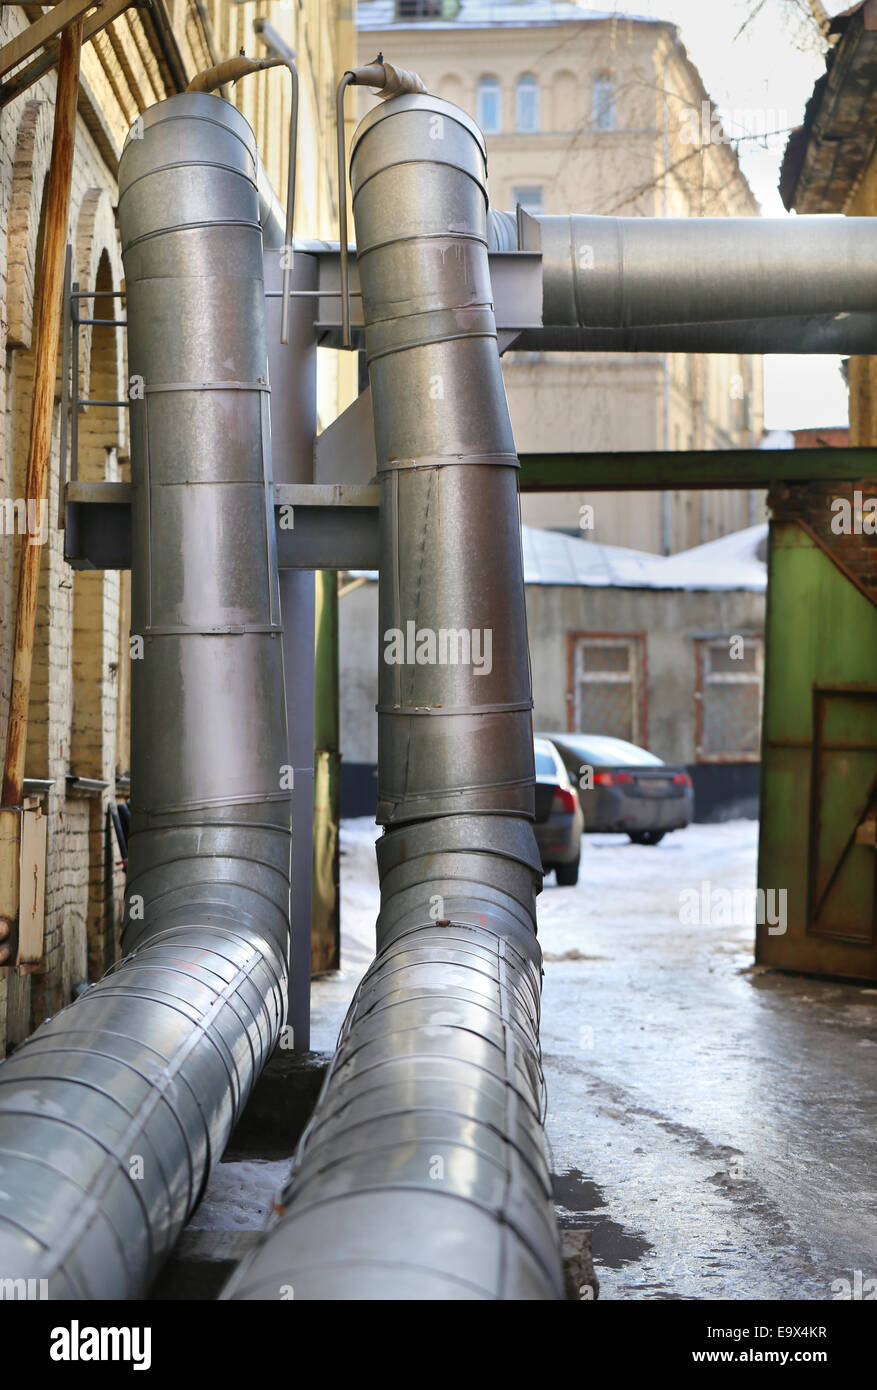 The Tumbleweed Suite - Page 20 Hot-water-pipe-are-on-the-street-in-central-moscow-E9X4KR